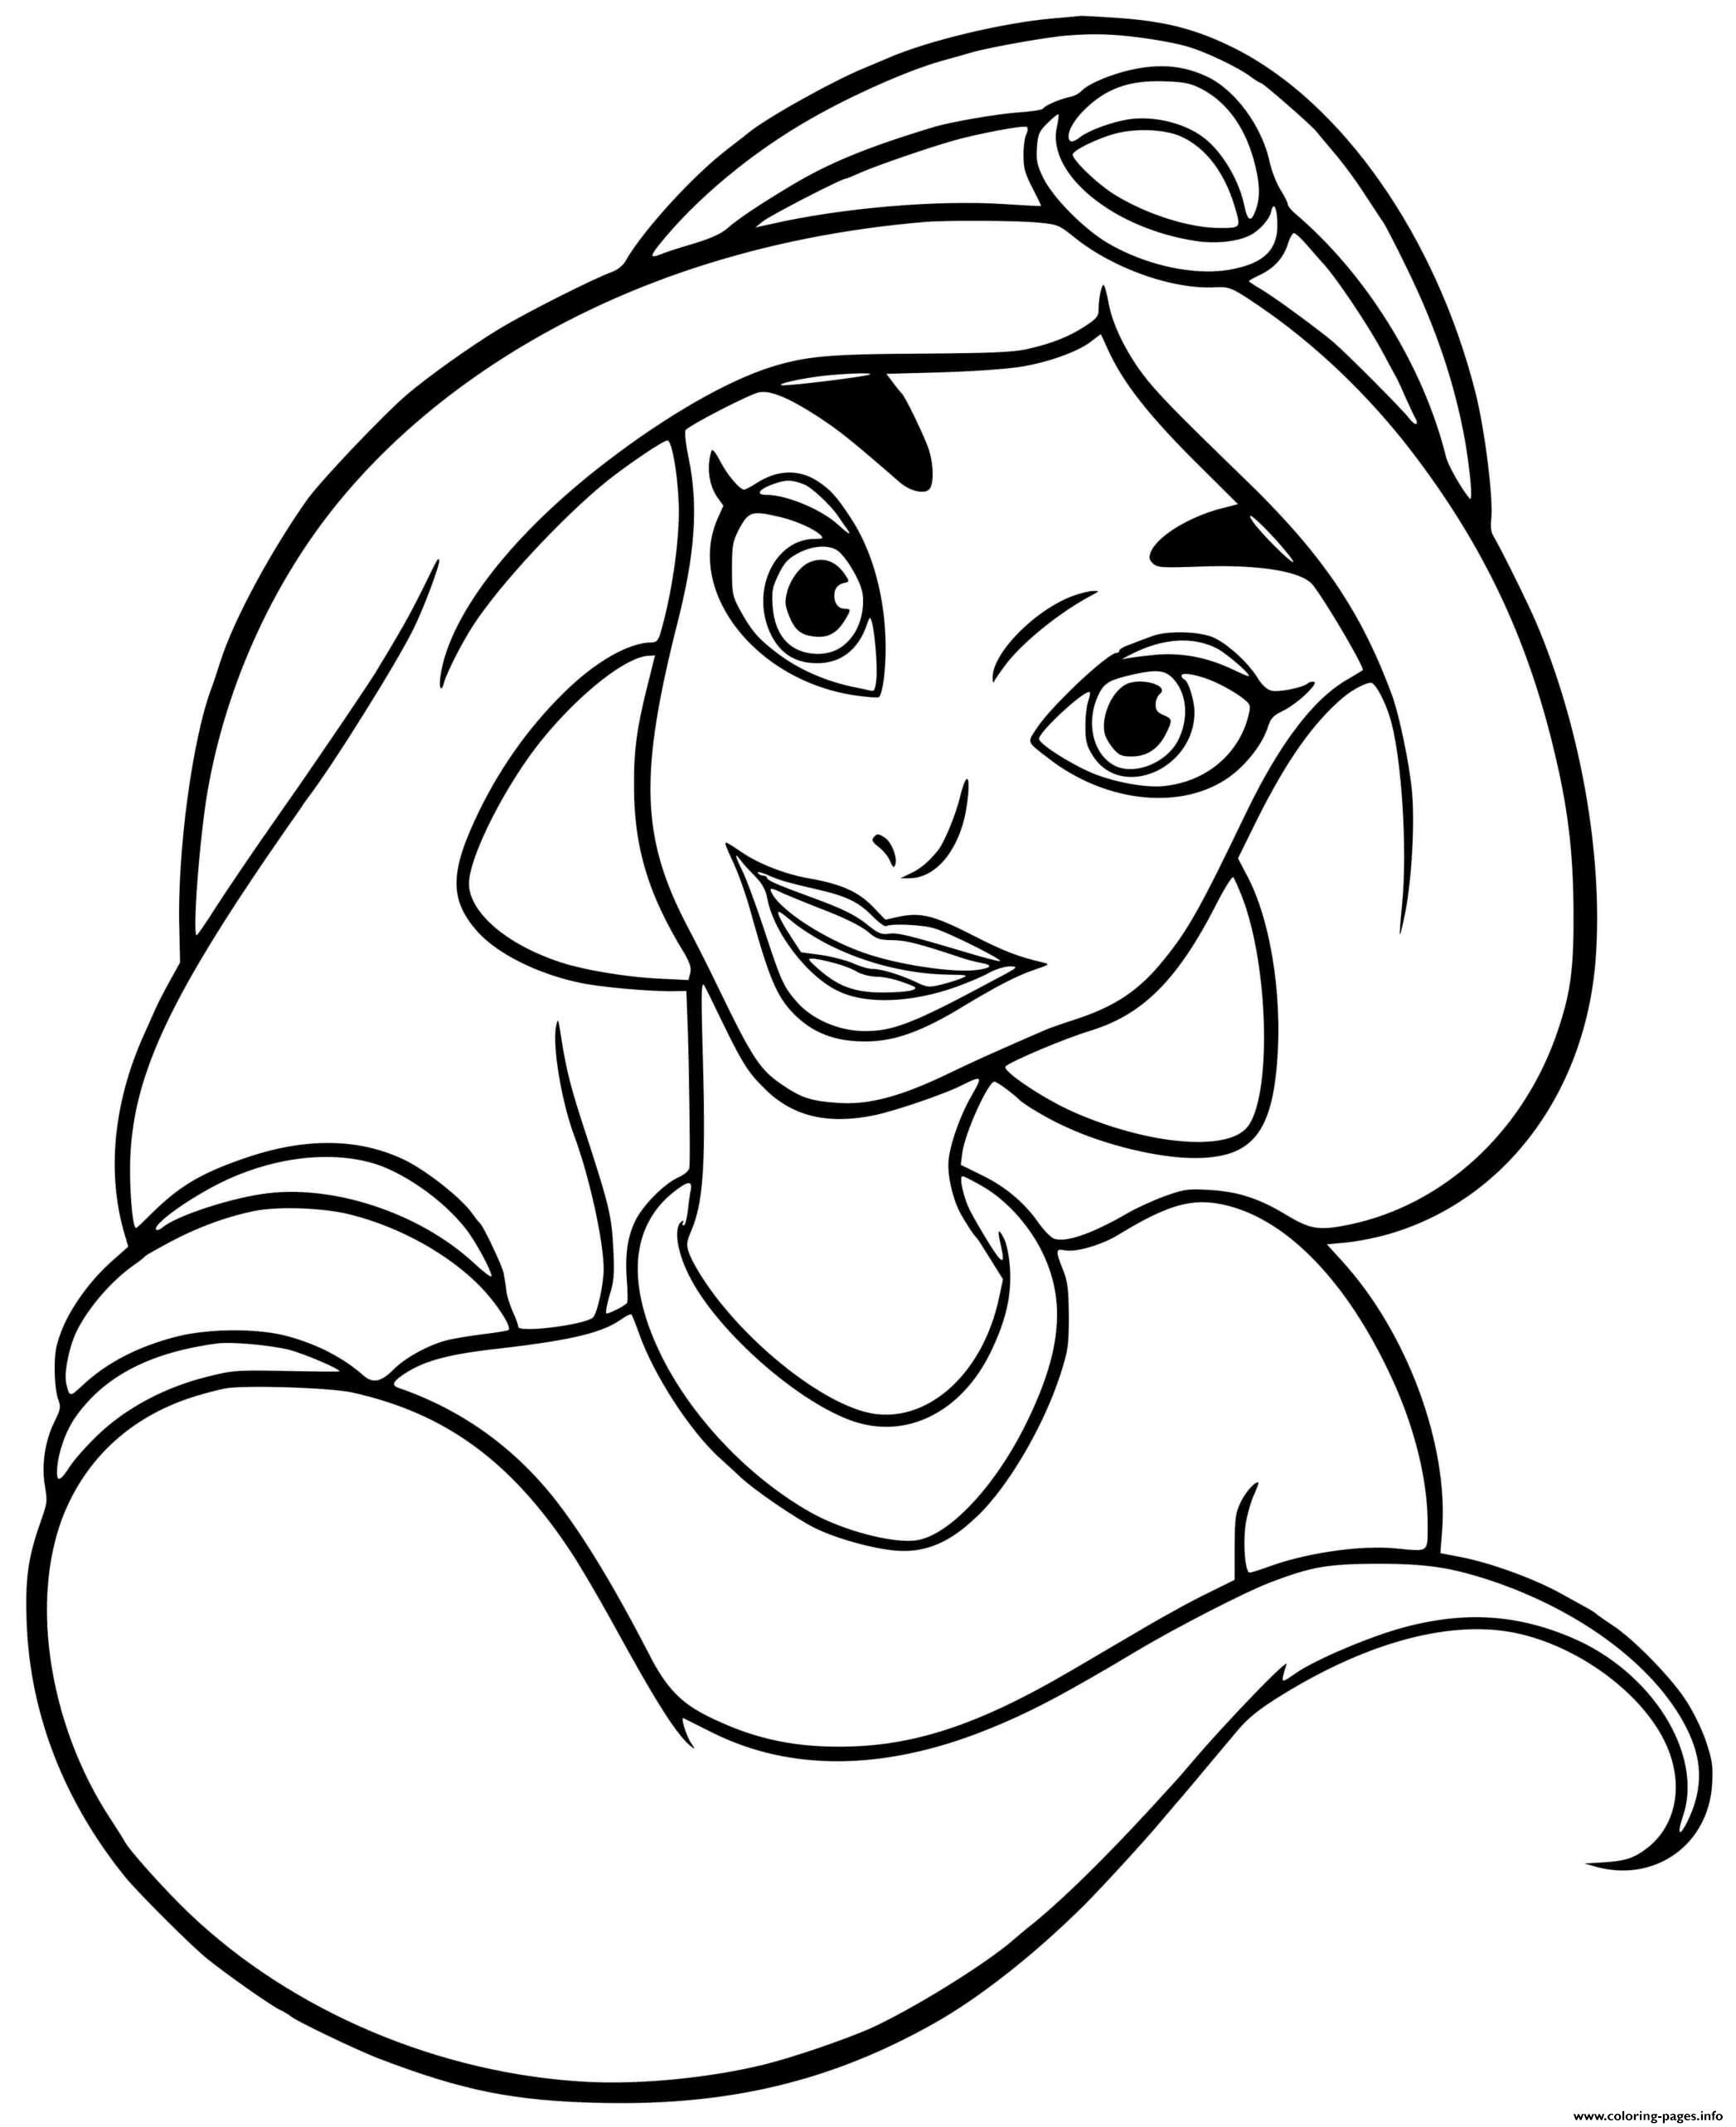 Disney Princess Jasmine From Aladdin Coloring Pages Printable